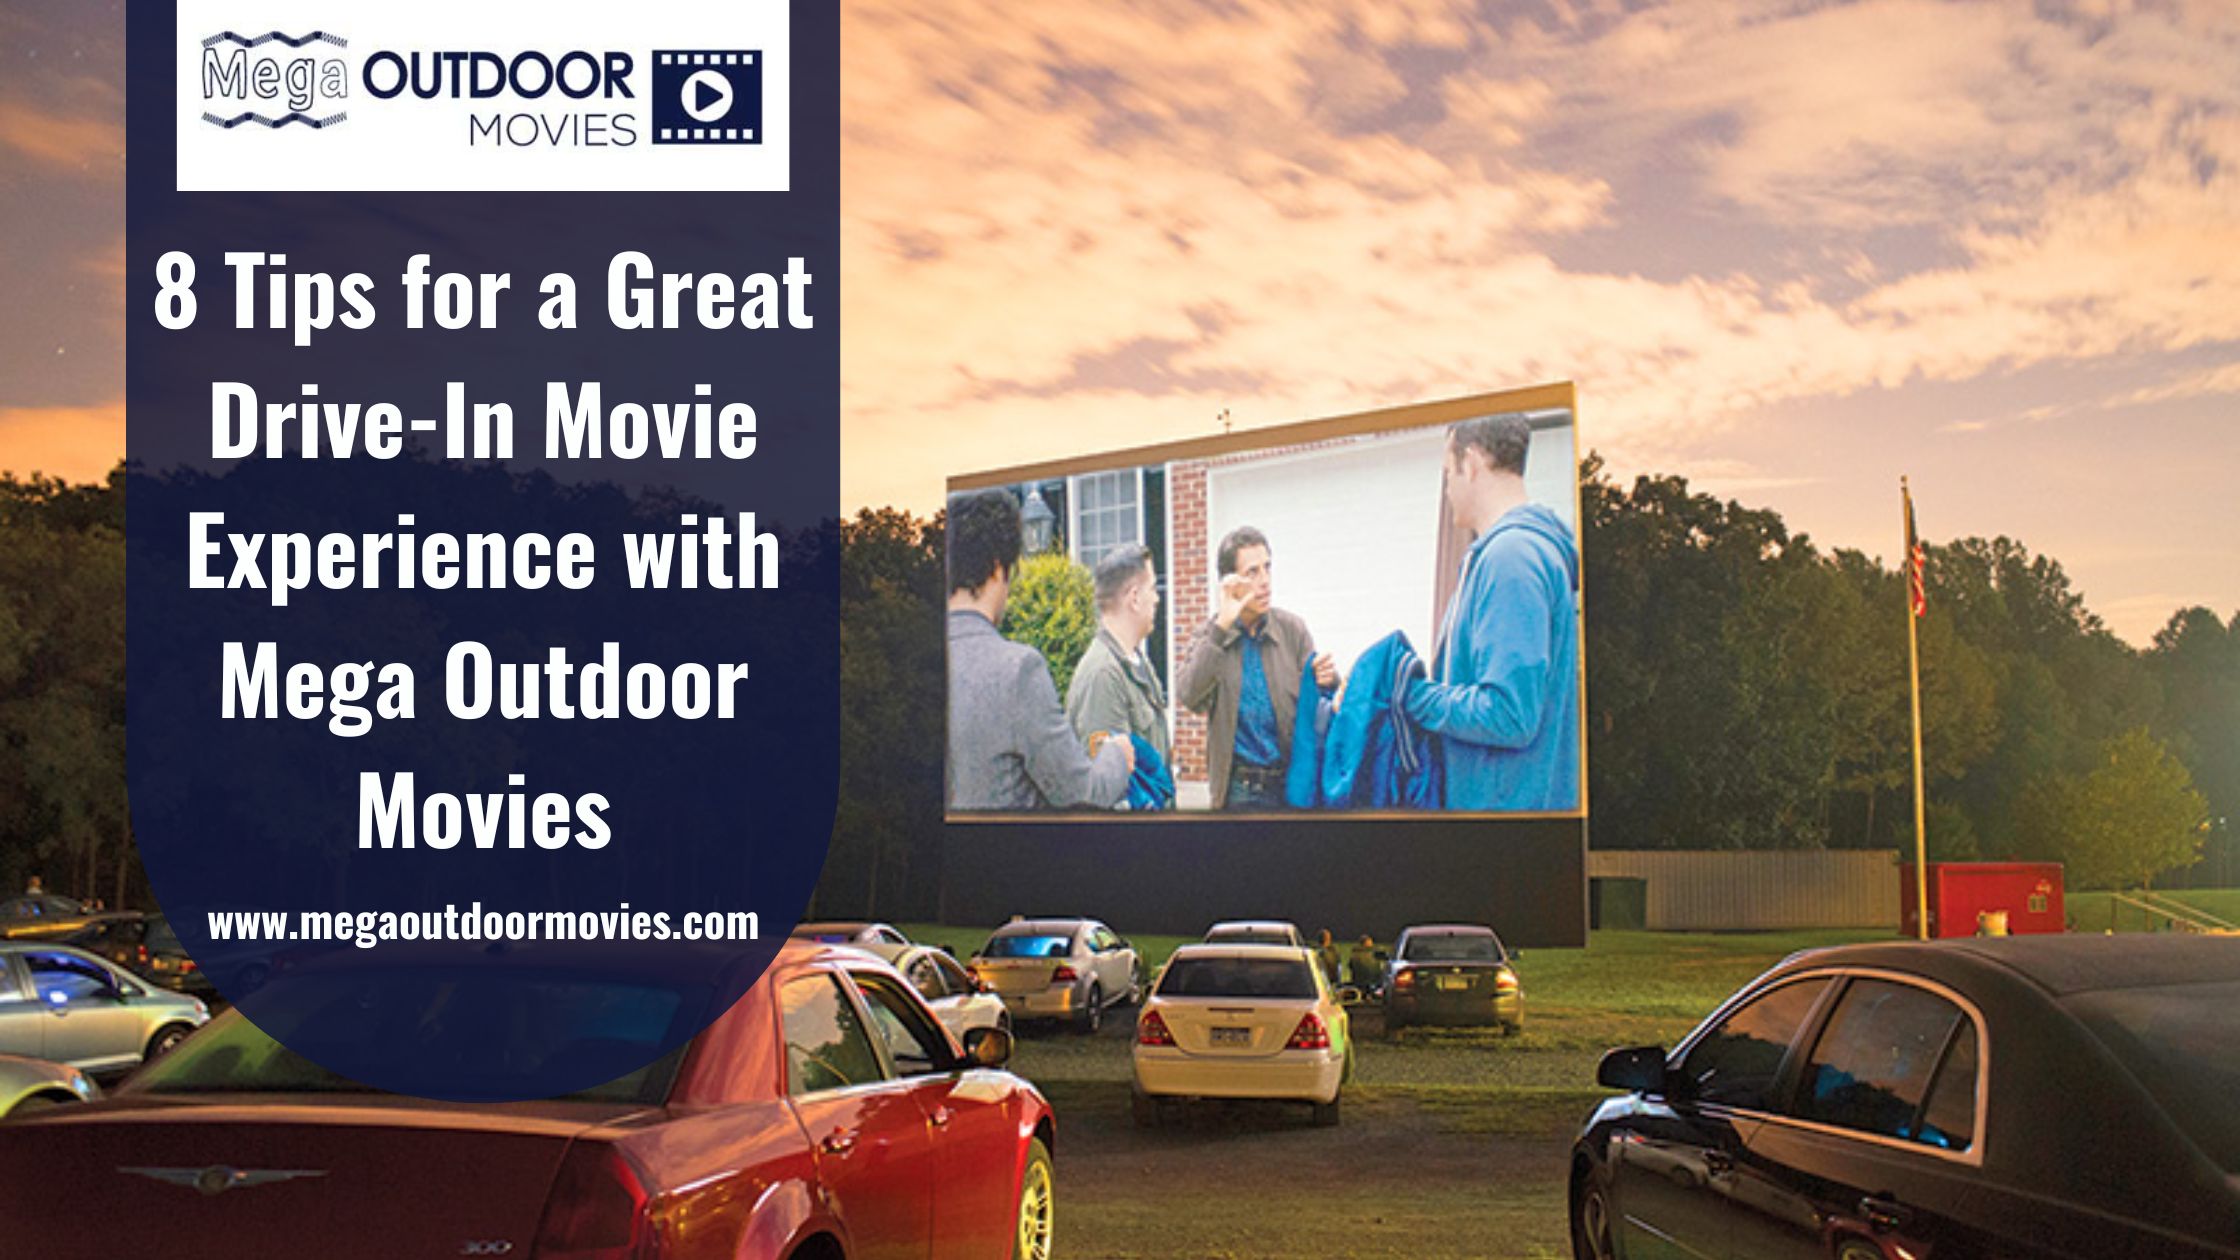 8 Tips for a Great Drive-In Movie Experience with Mega Outdoor Movies